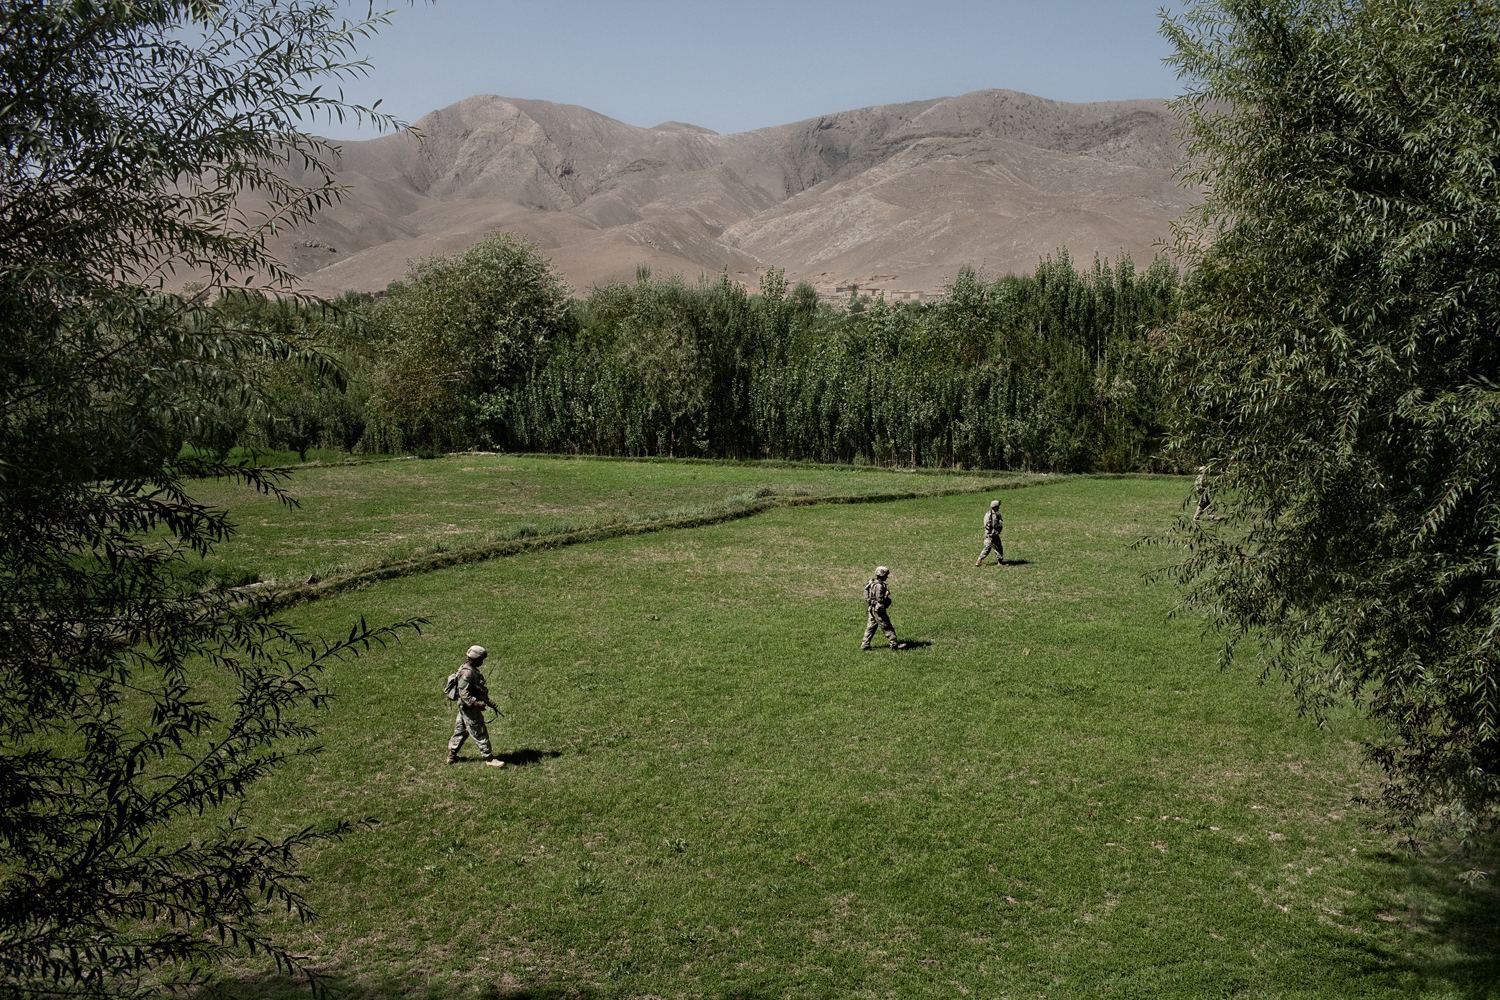  U.S. Army soldiers patrol in the Tangi Valley, Wardak Province, Afghanistan.    